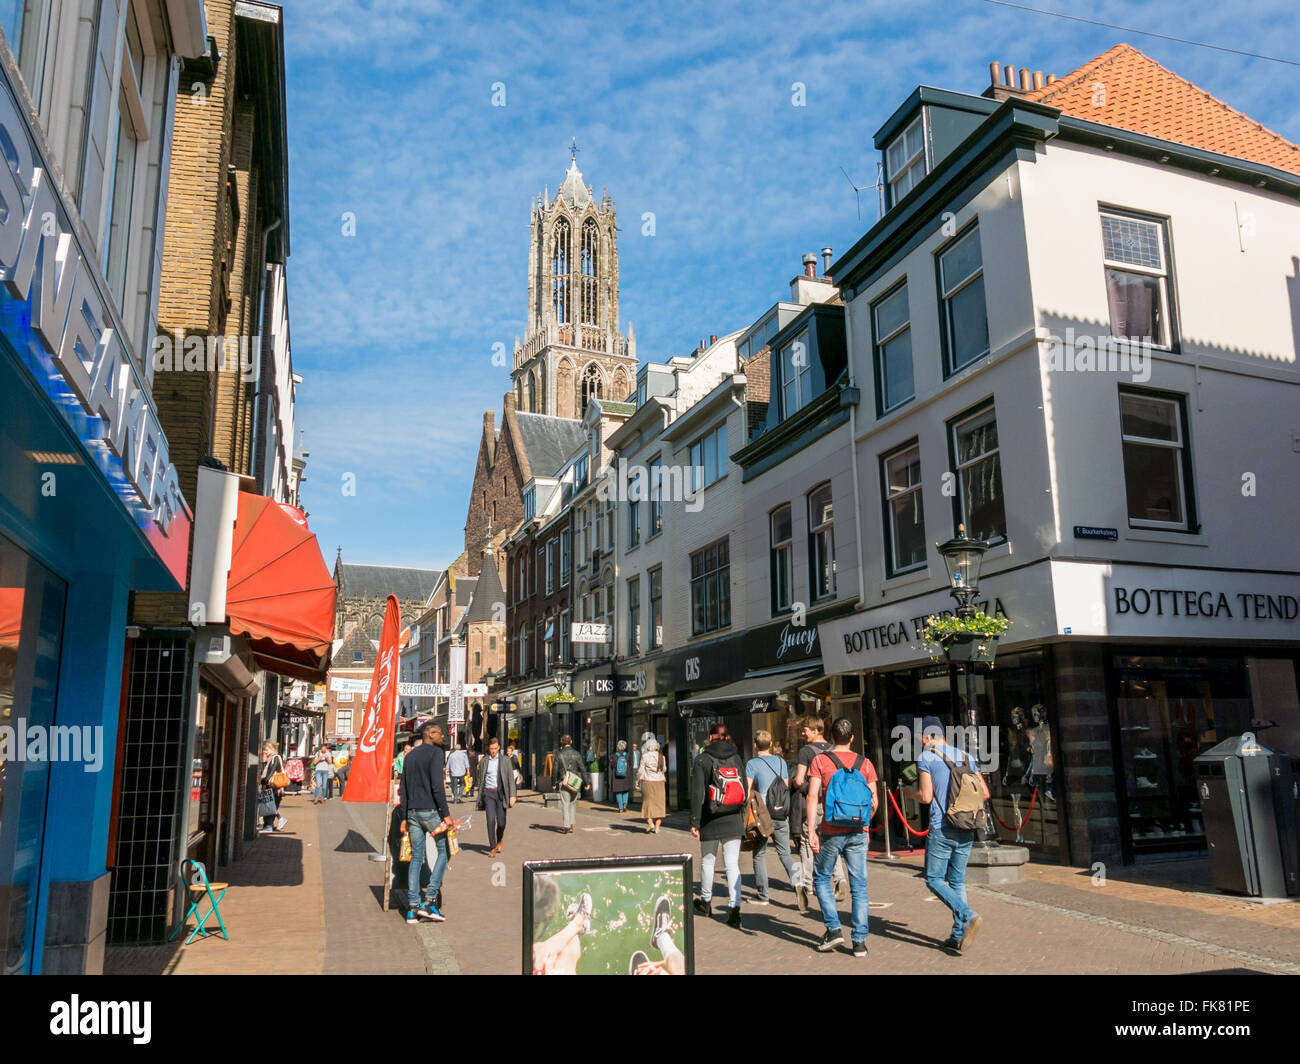 Dom church tower and people in shopping street Steenweg in the city center of Utrecht, Netherlands Stock Photo